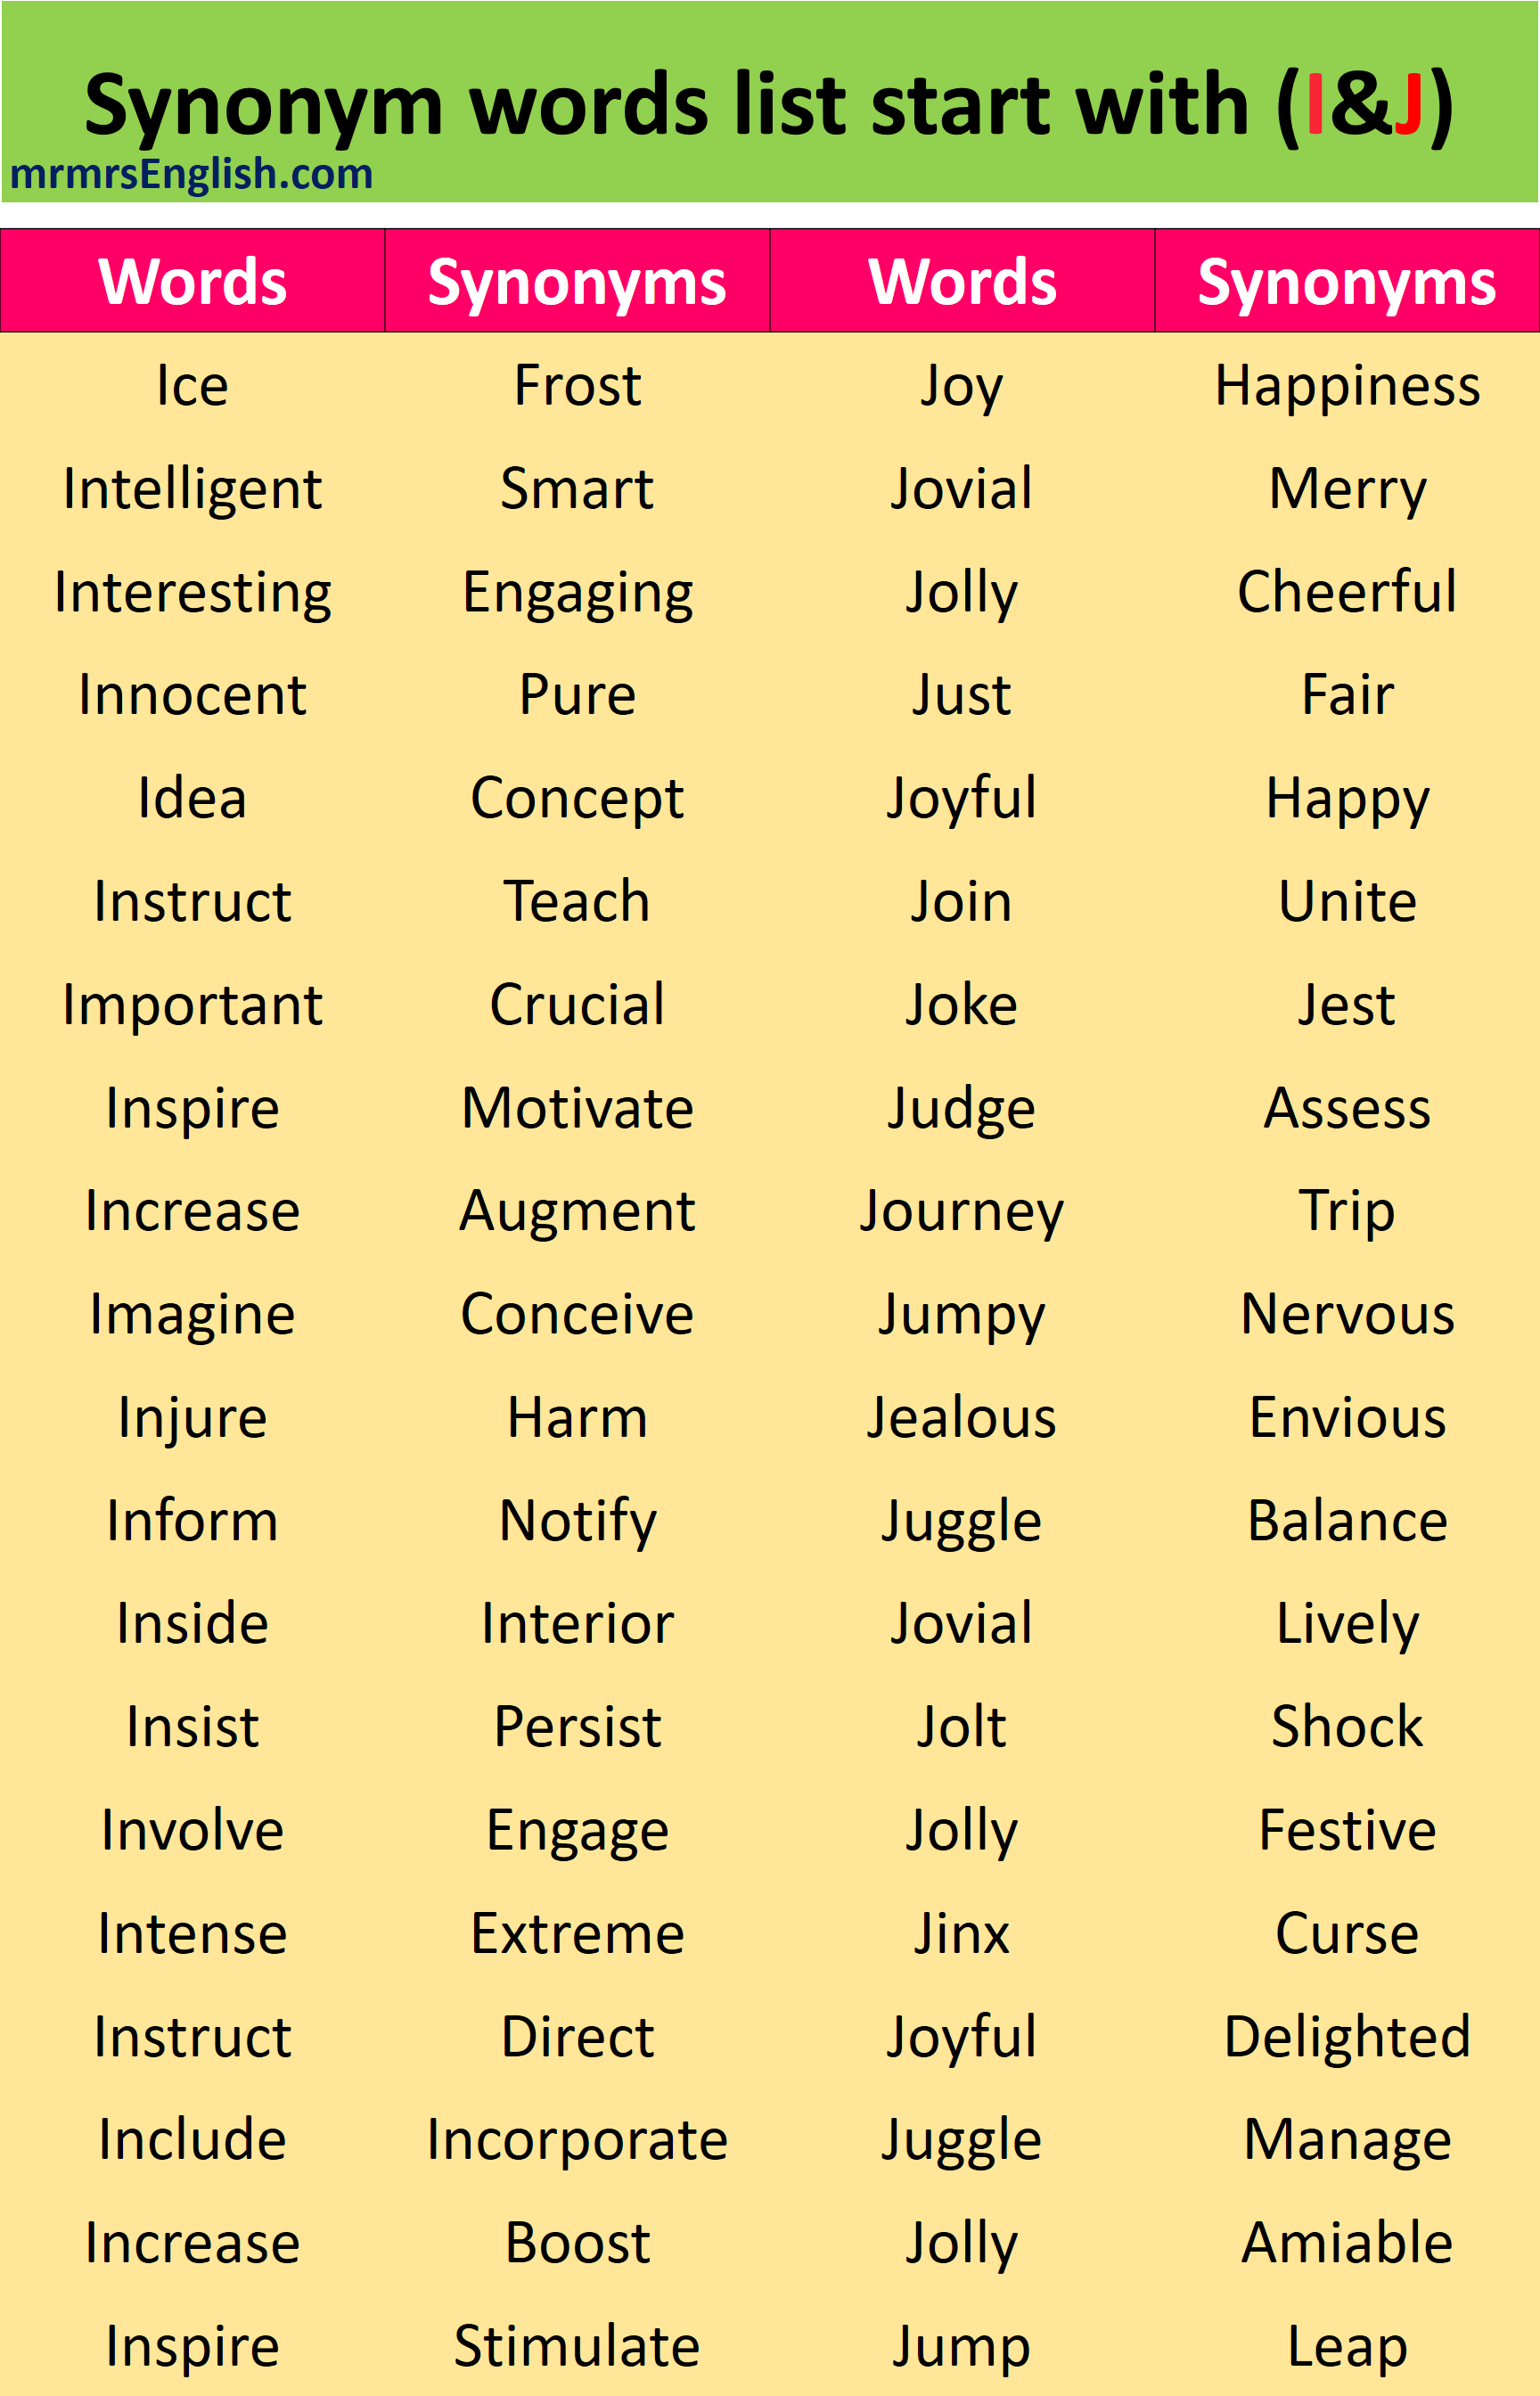 Synonyms words I & J